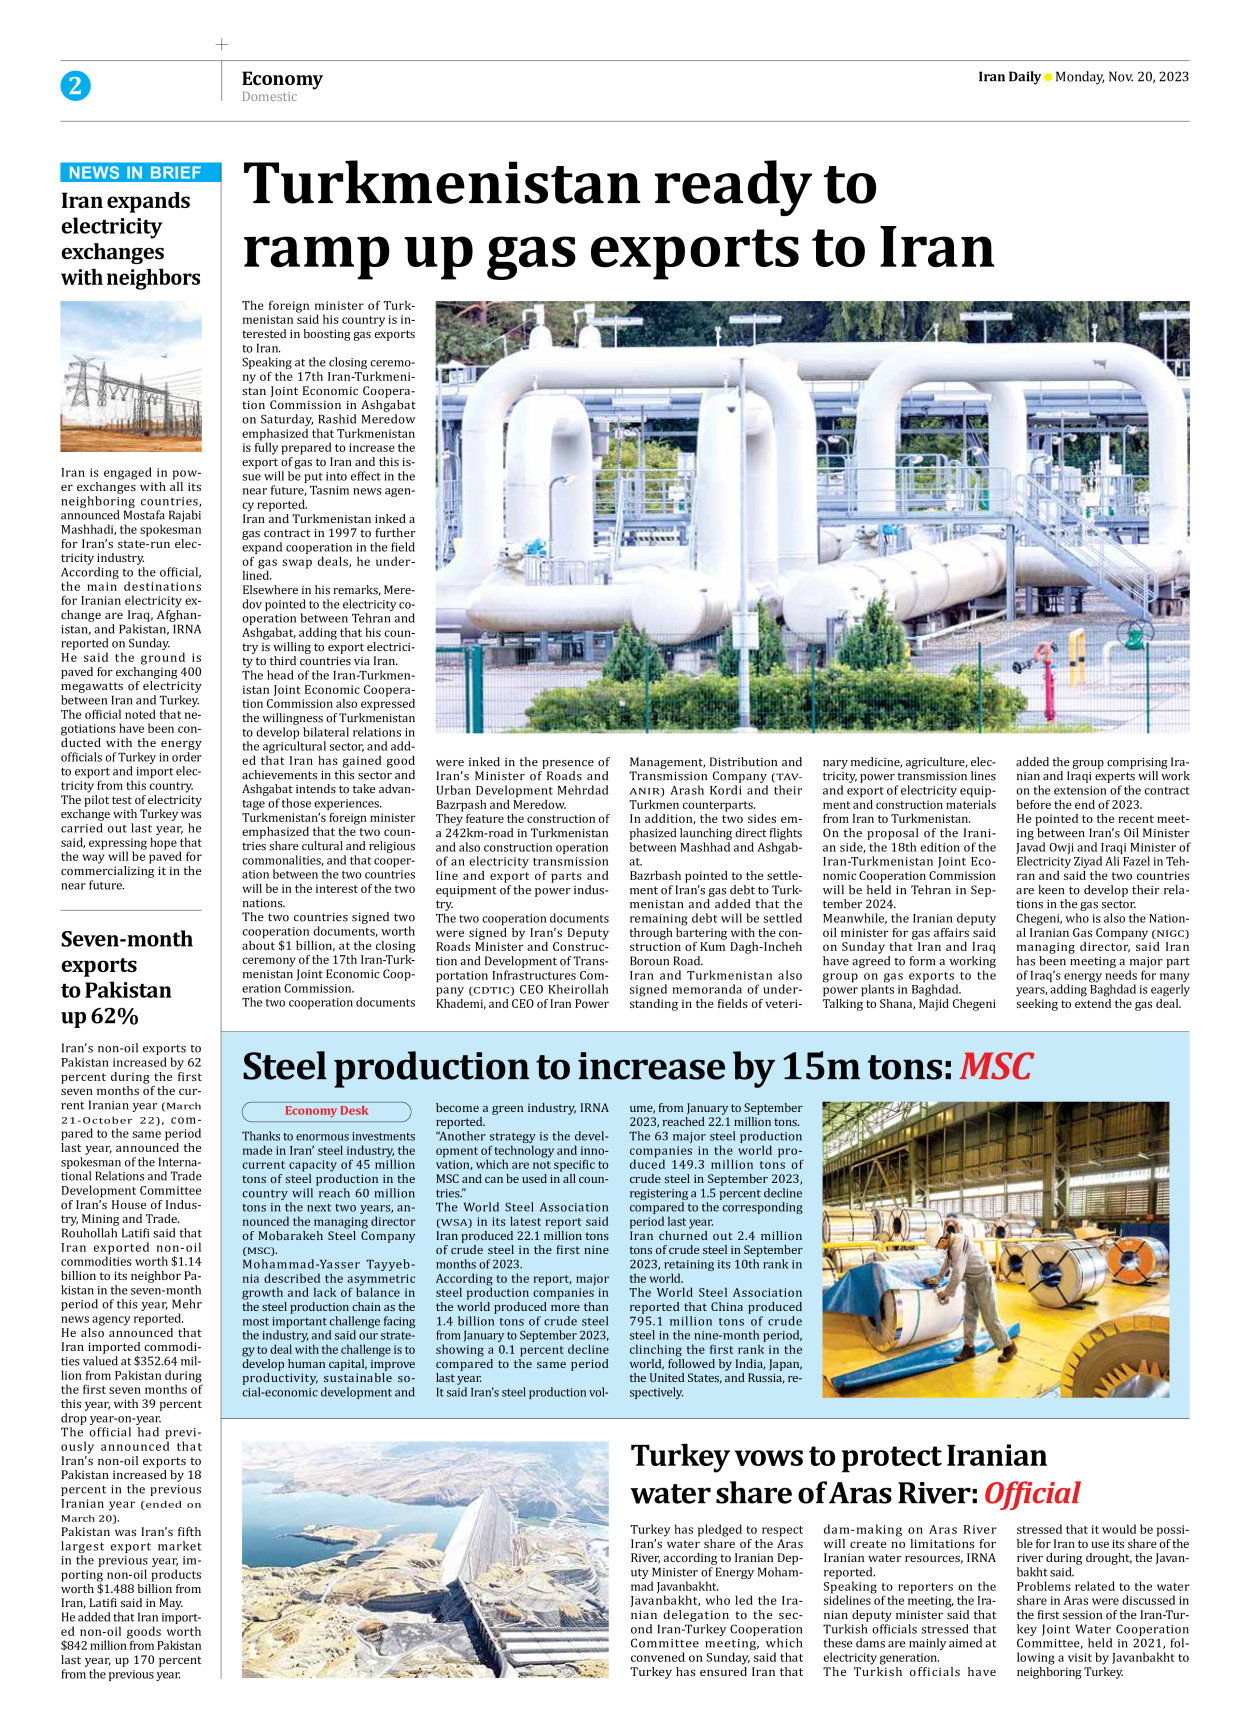 Iran Daily - Number Seven Thousand Four Hundred and Thirty Nine - 20 November 2023 - Page 2